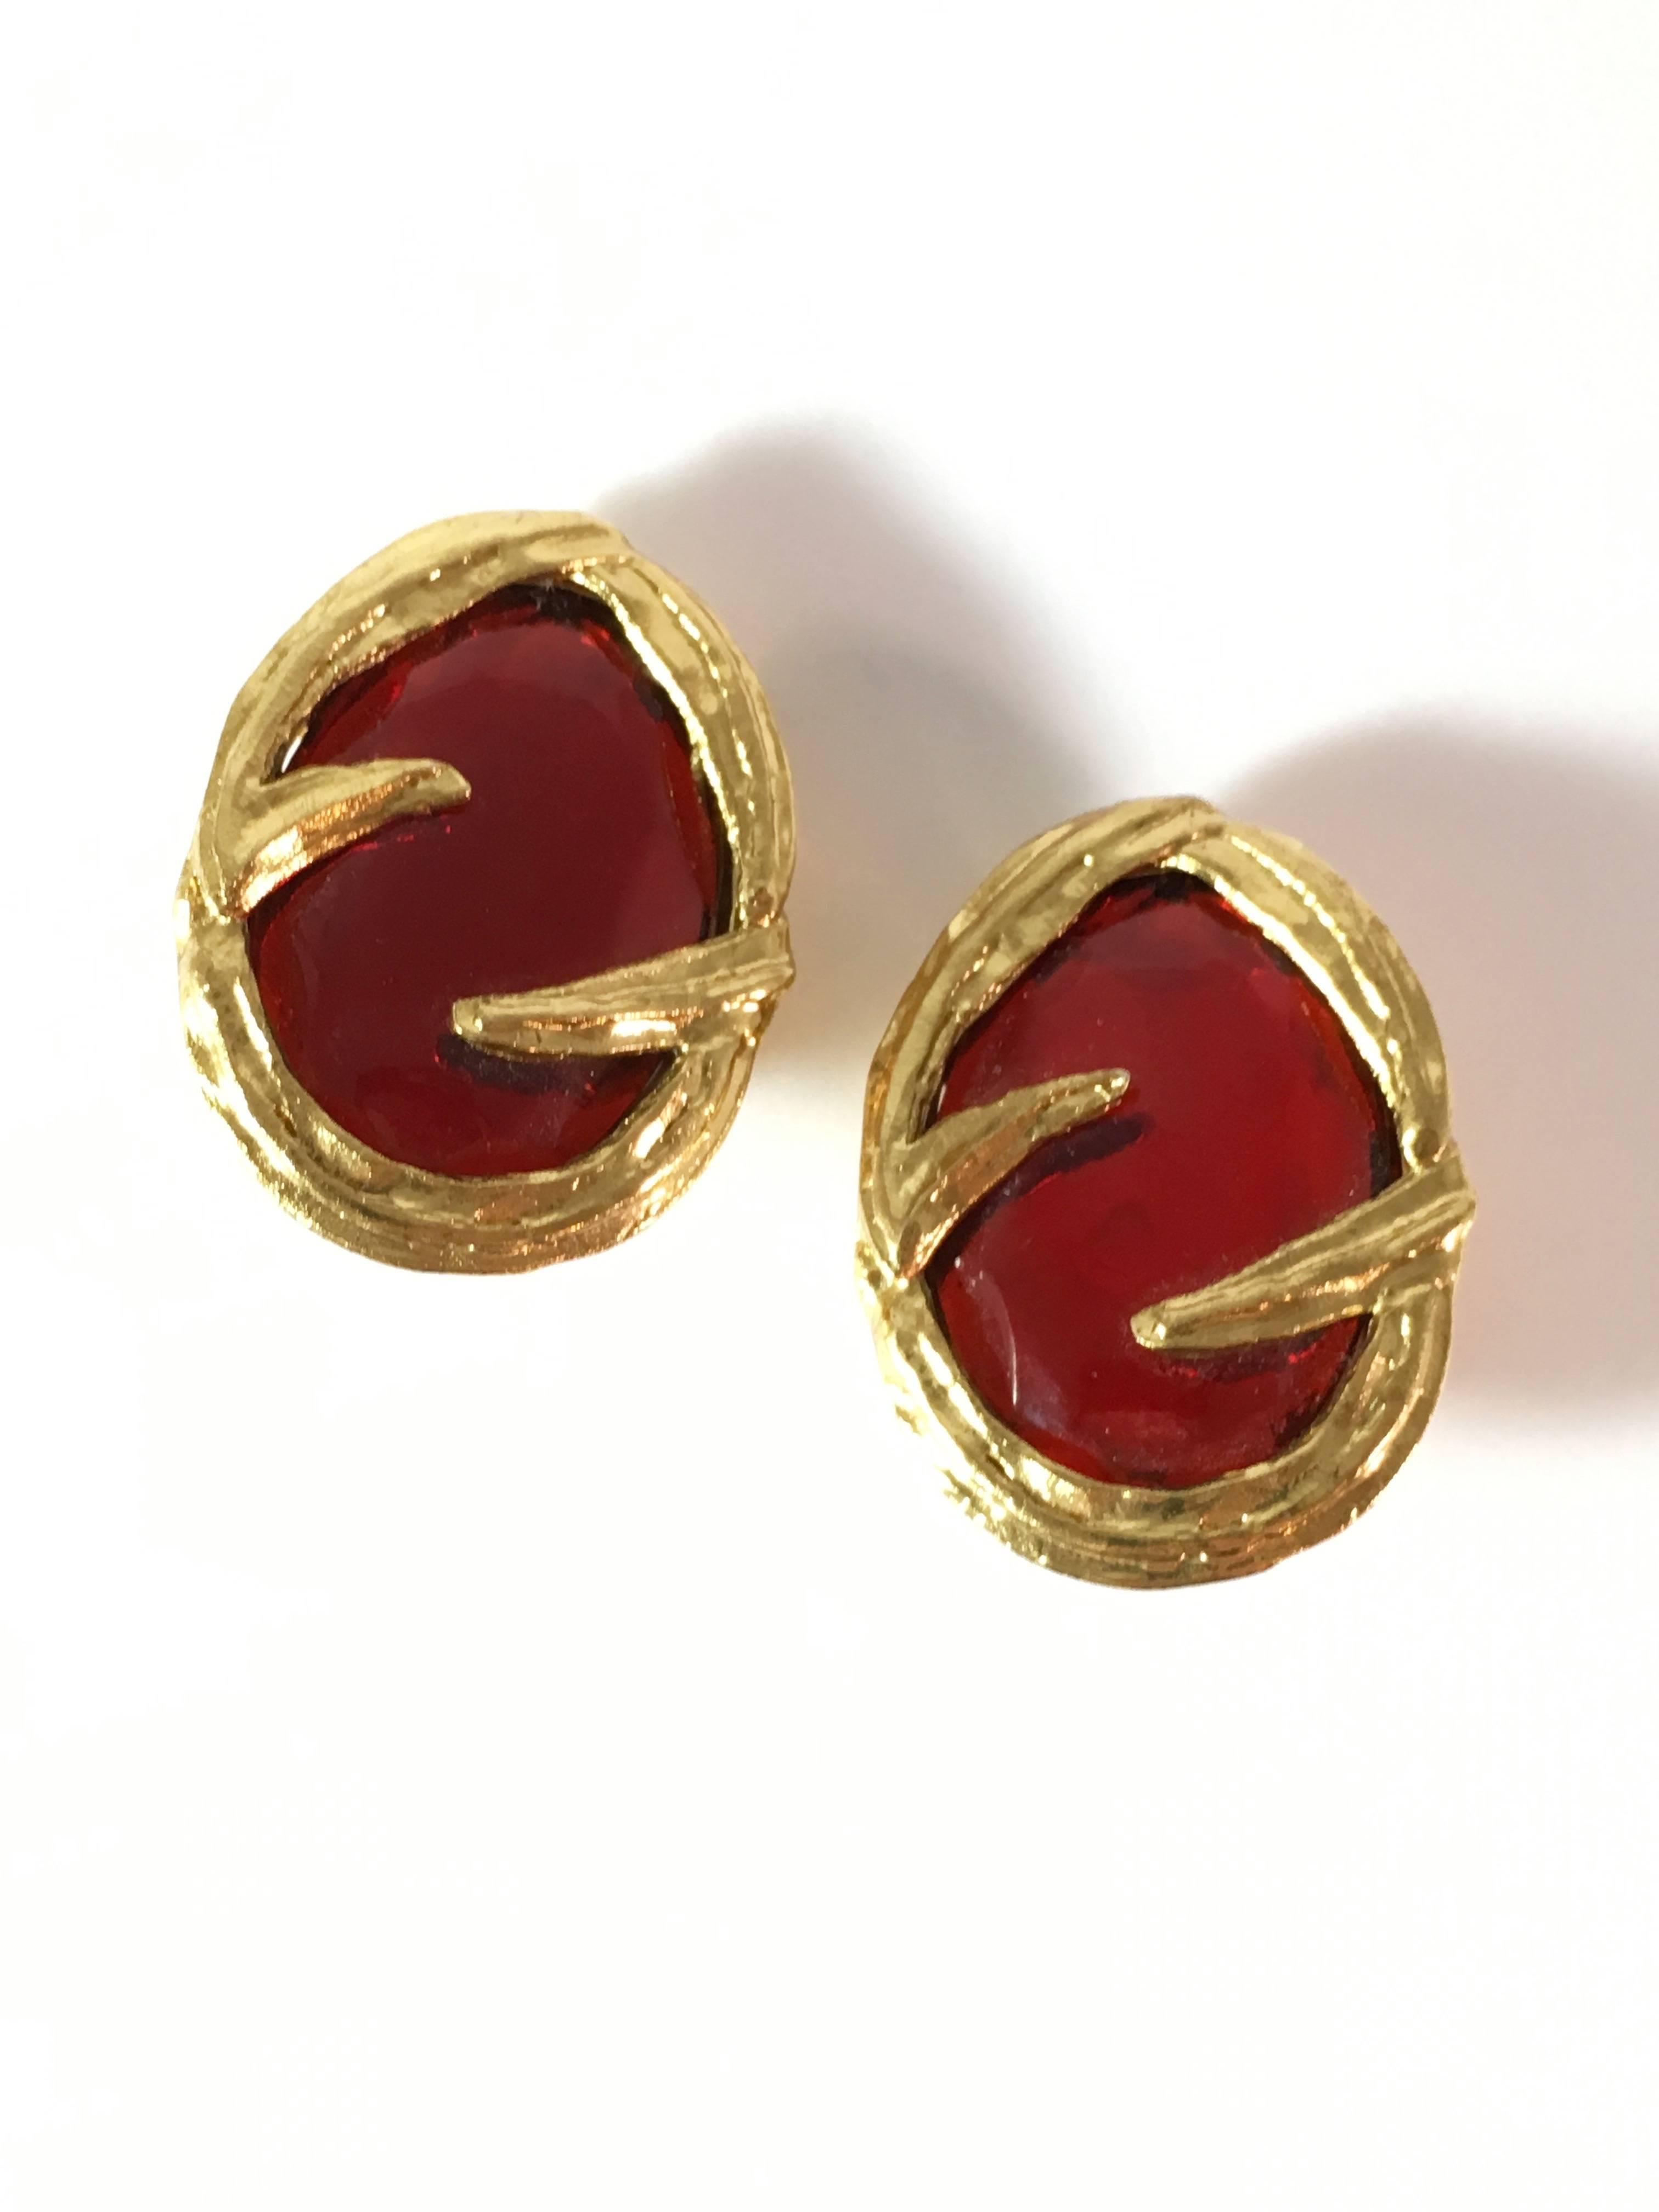 This is a pair of fabulous Yves Saint Laurent clip-on earrings from the 1980s. They are gold-tone and red Gripoix glass earrings. They are signed on the back, 'YSL Made in France' on the back of the earrings and 'YSL' on the back of the clip portion